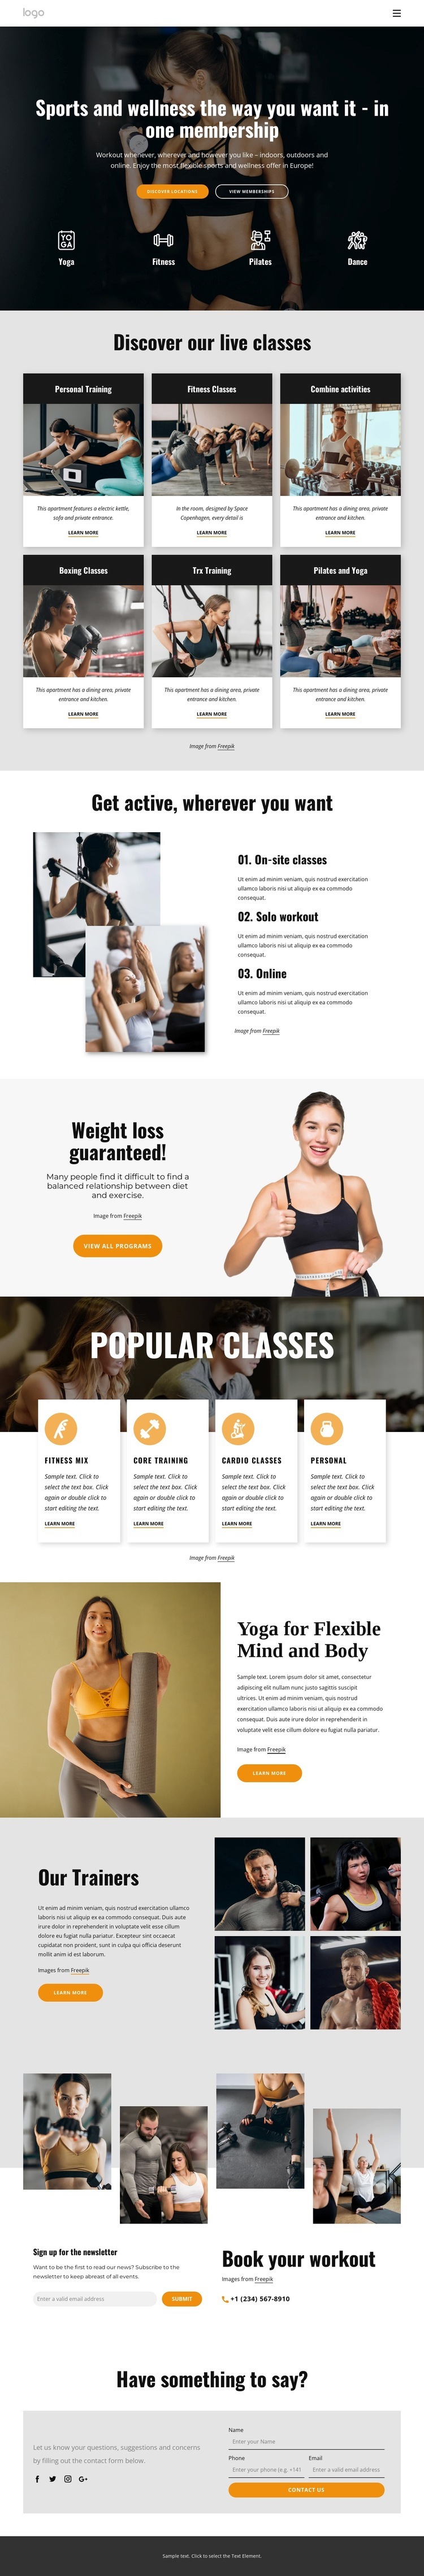 Enjoy the most flexible sports and wellness Web Page Design